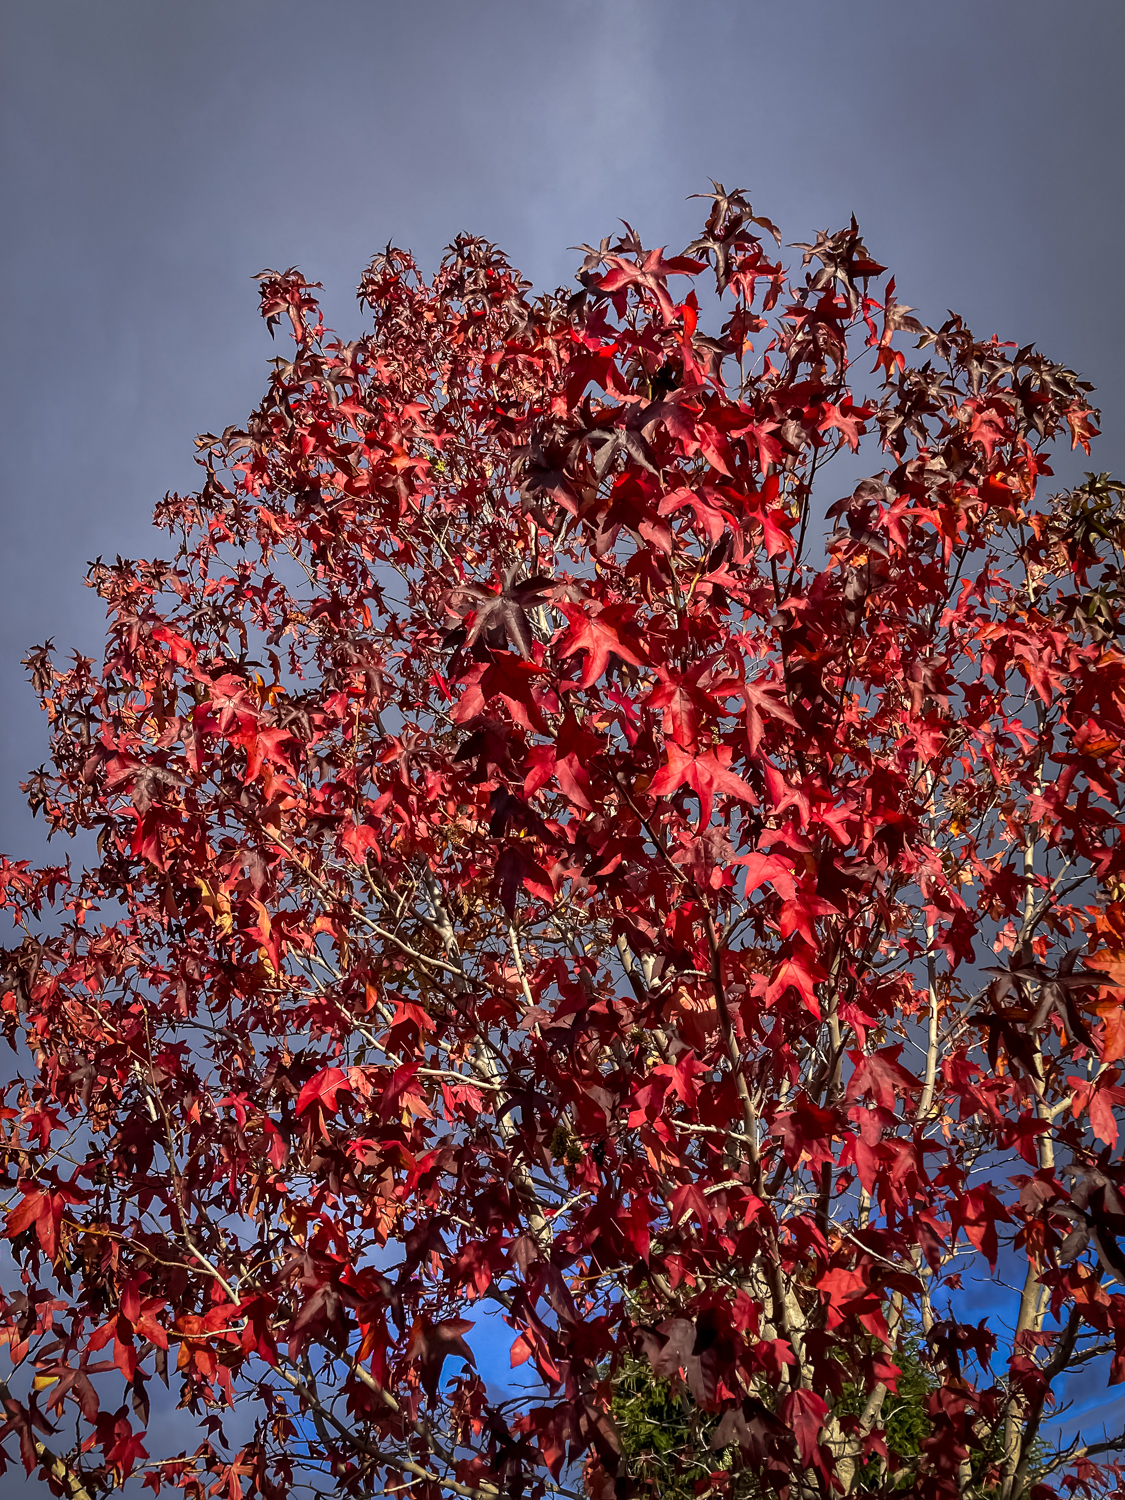 A large tree with red leaves